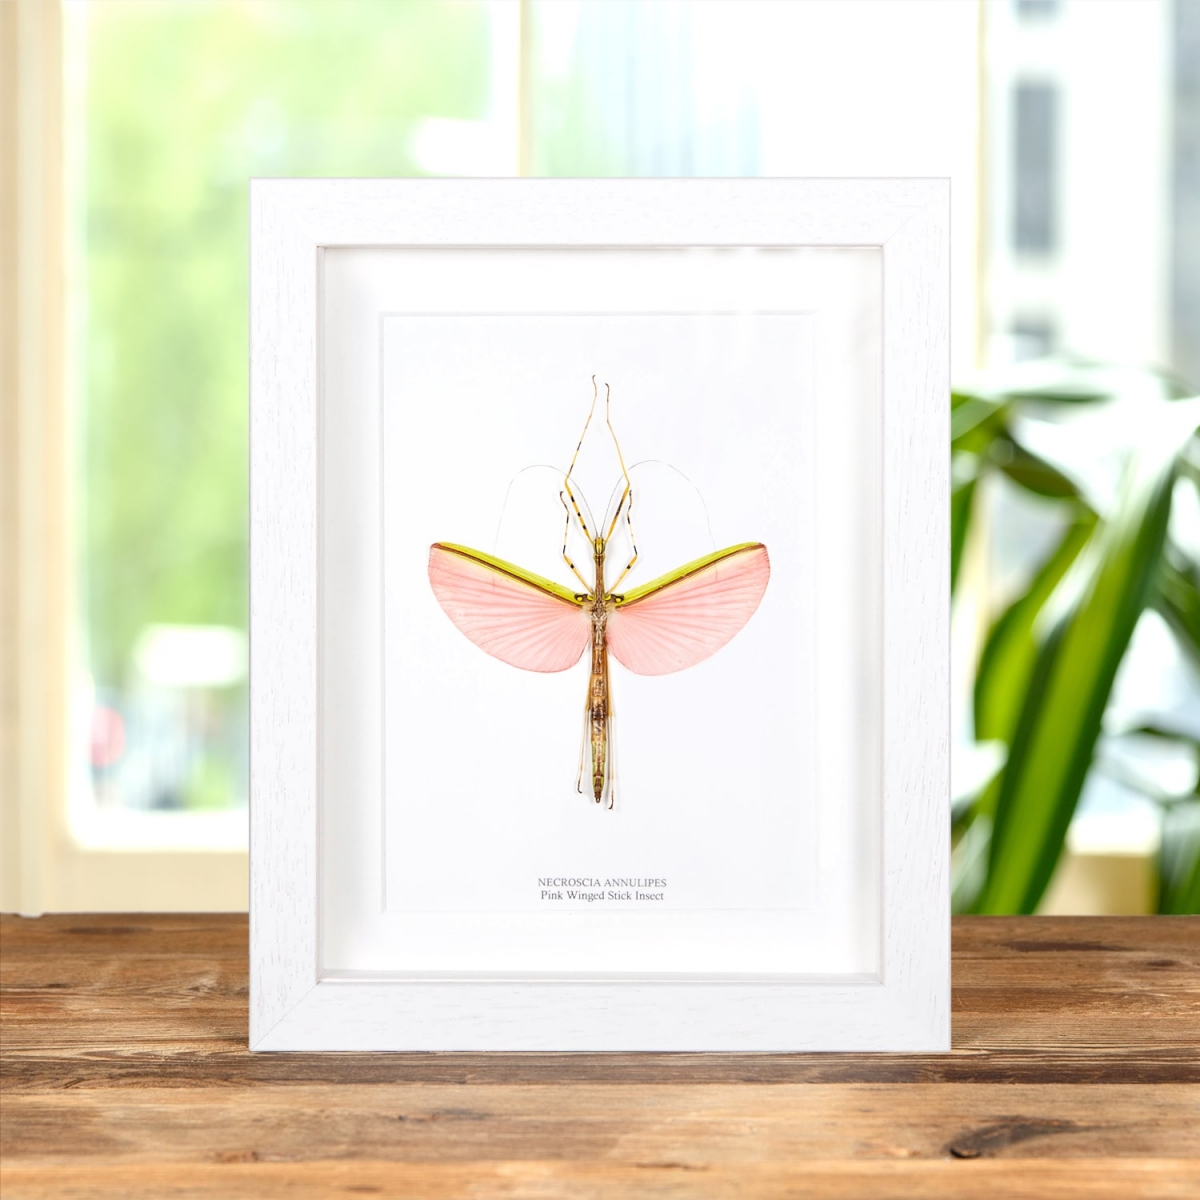 Pink Winged Stick Insect in Box Frame (Necroscia annulipes)